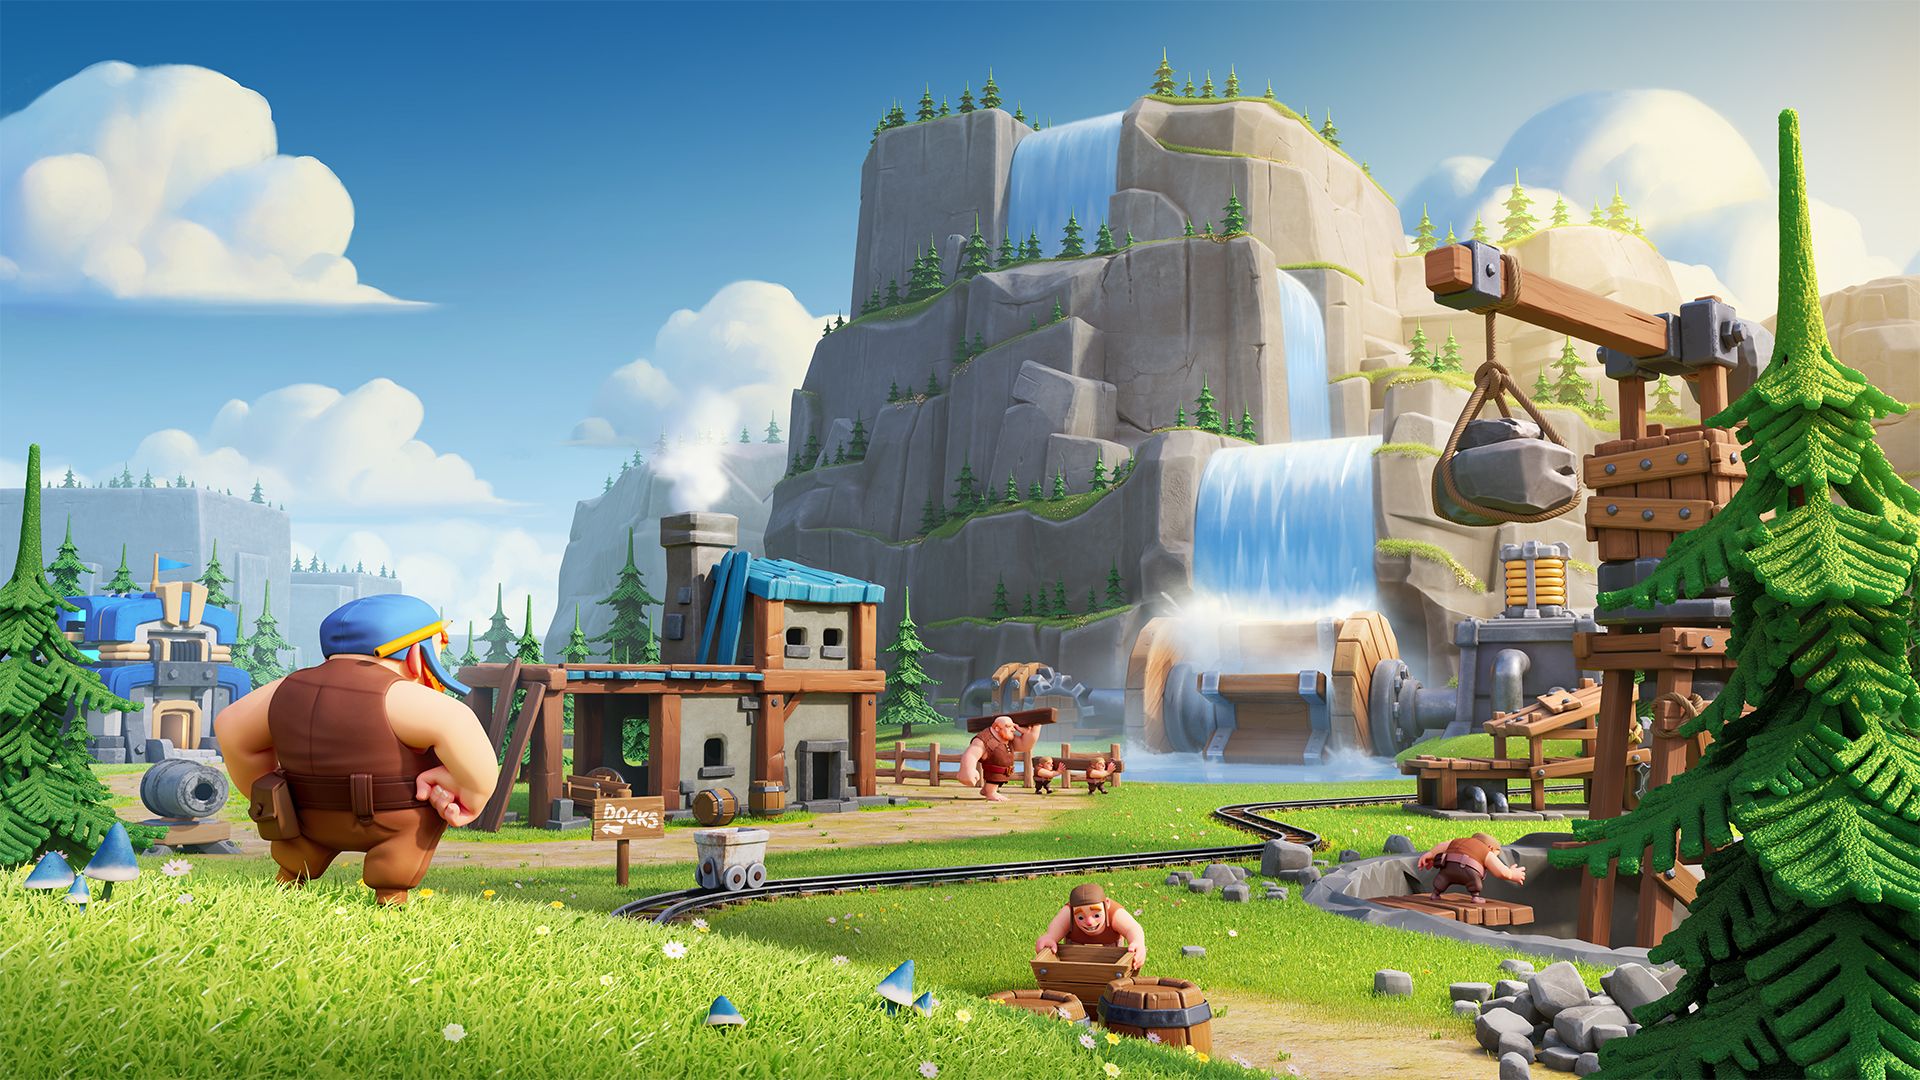 How to Change Scenery in Clash of Clans Touch, Tap, Play